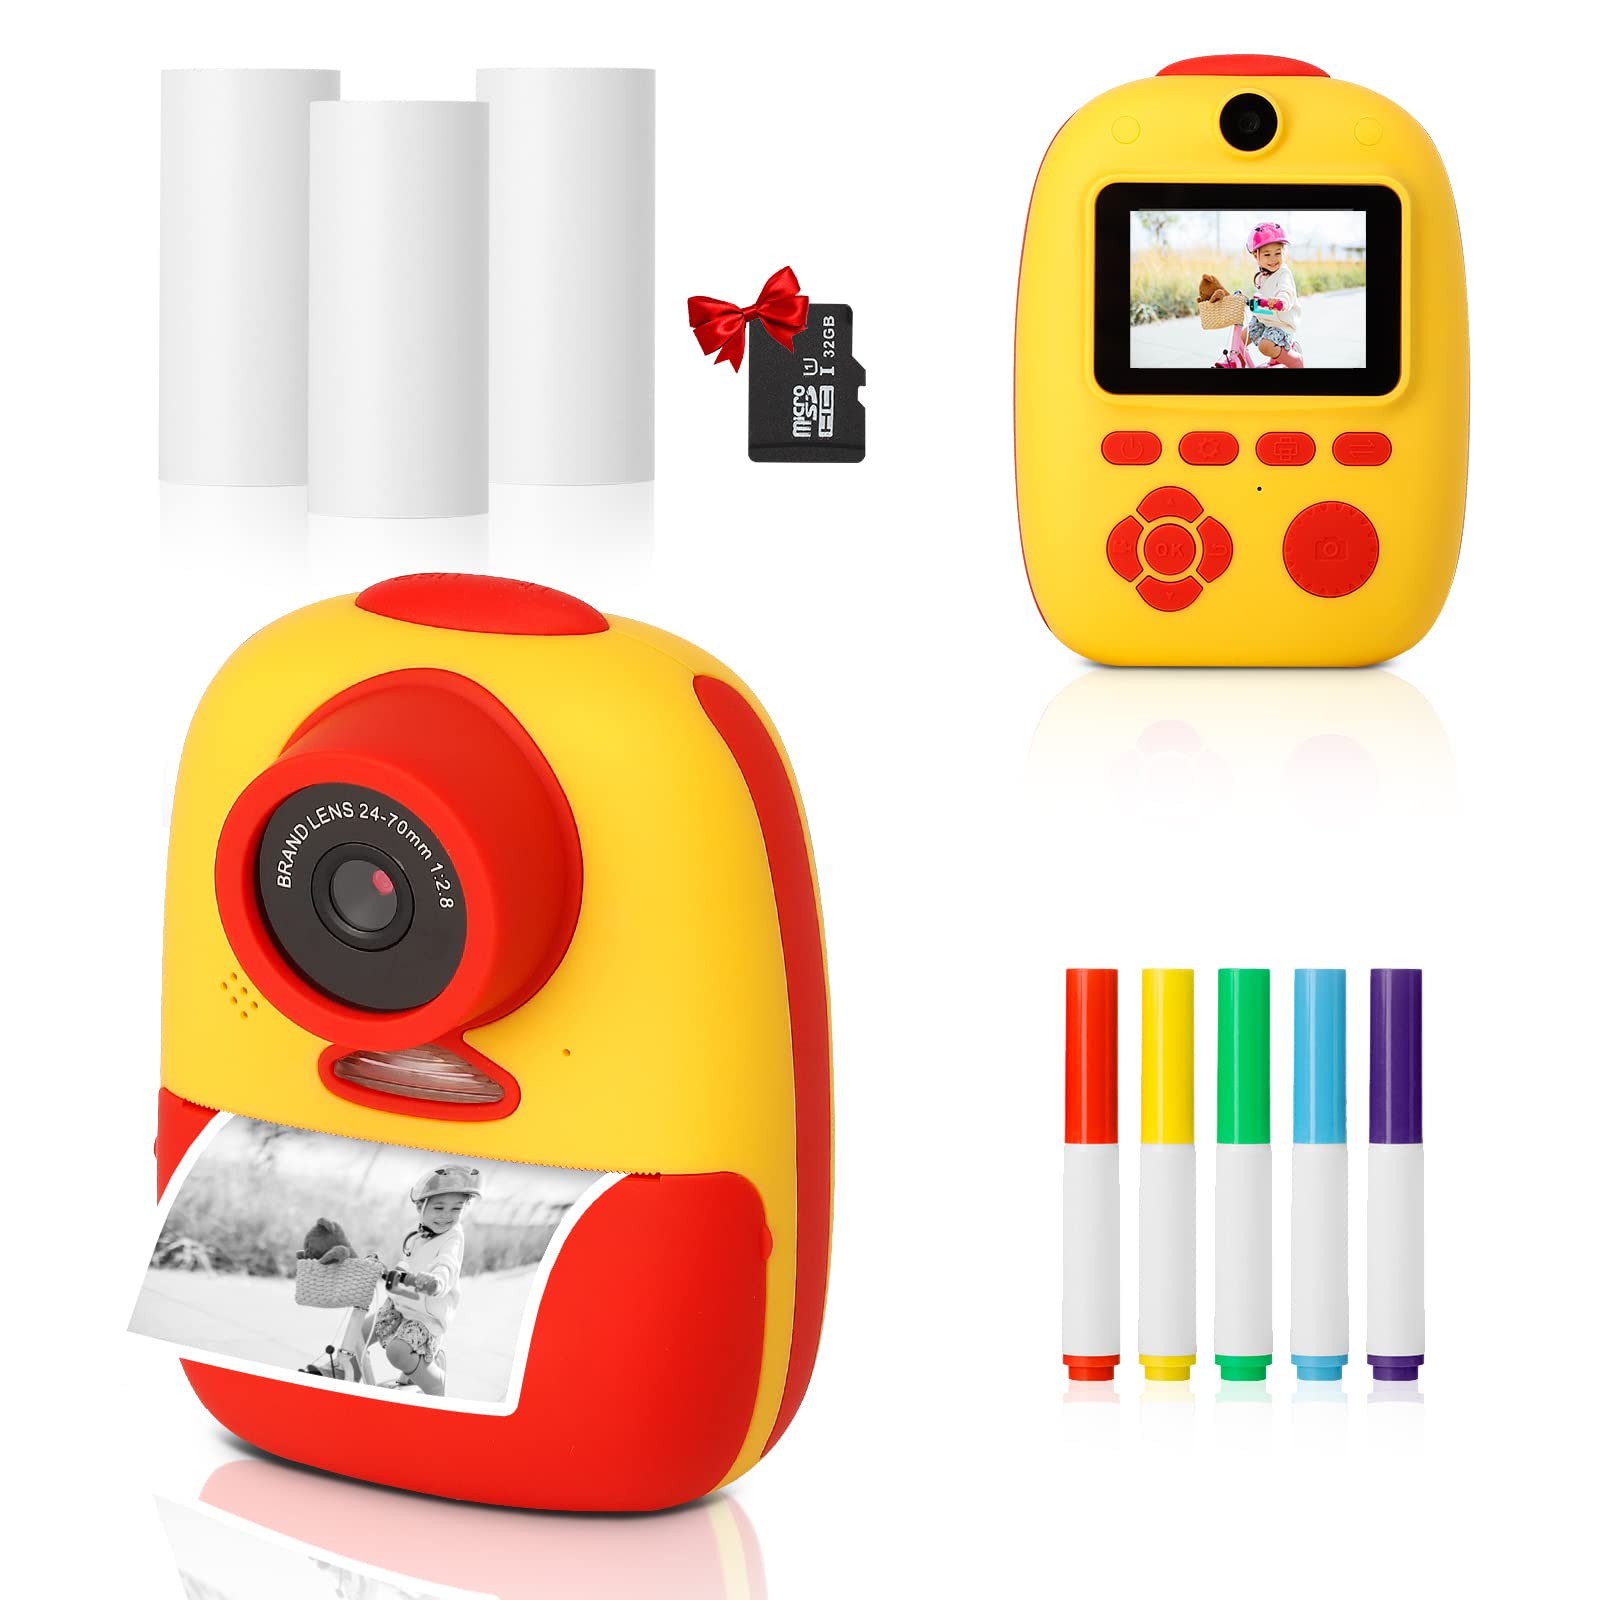 FTXOAM 1080P Kids Camera Instant Print Toddler Digital Camera with Colored Pens, Toy Camera with Print Paper for Boys and Girls, 32GB Card,Ink-Free Printing, Birthday Day Gift (Yellow Red)